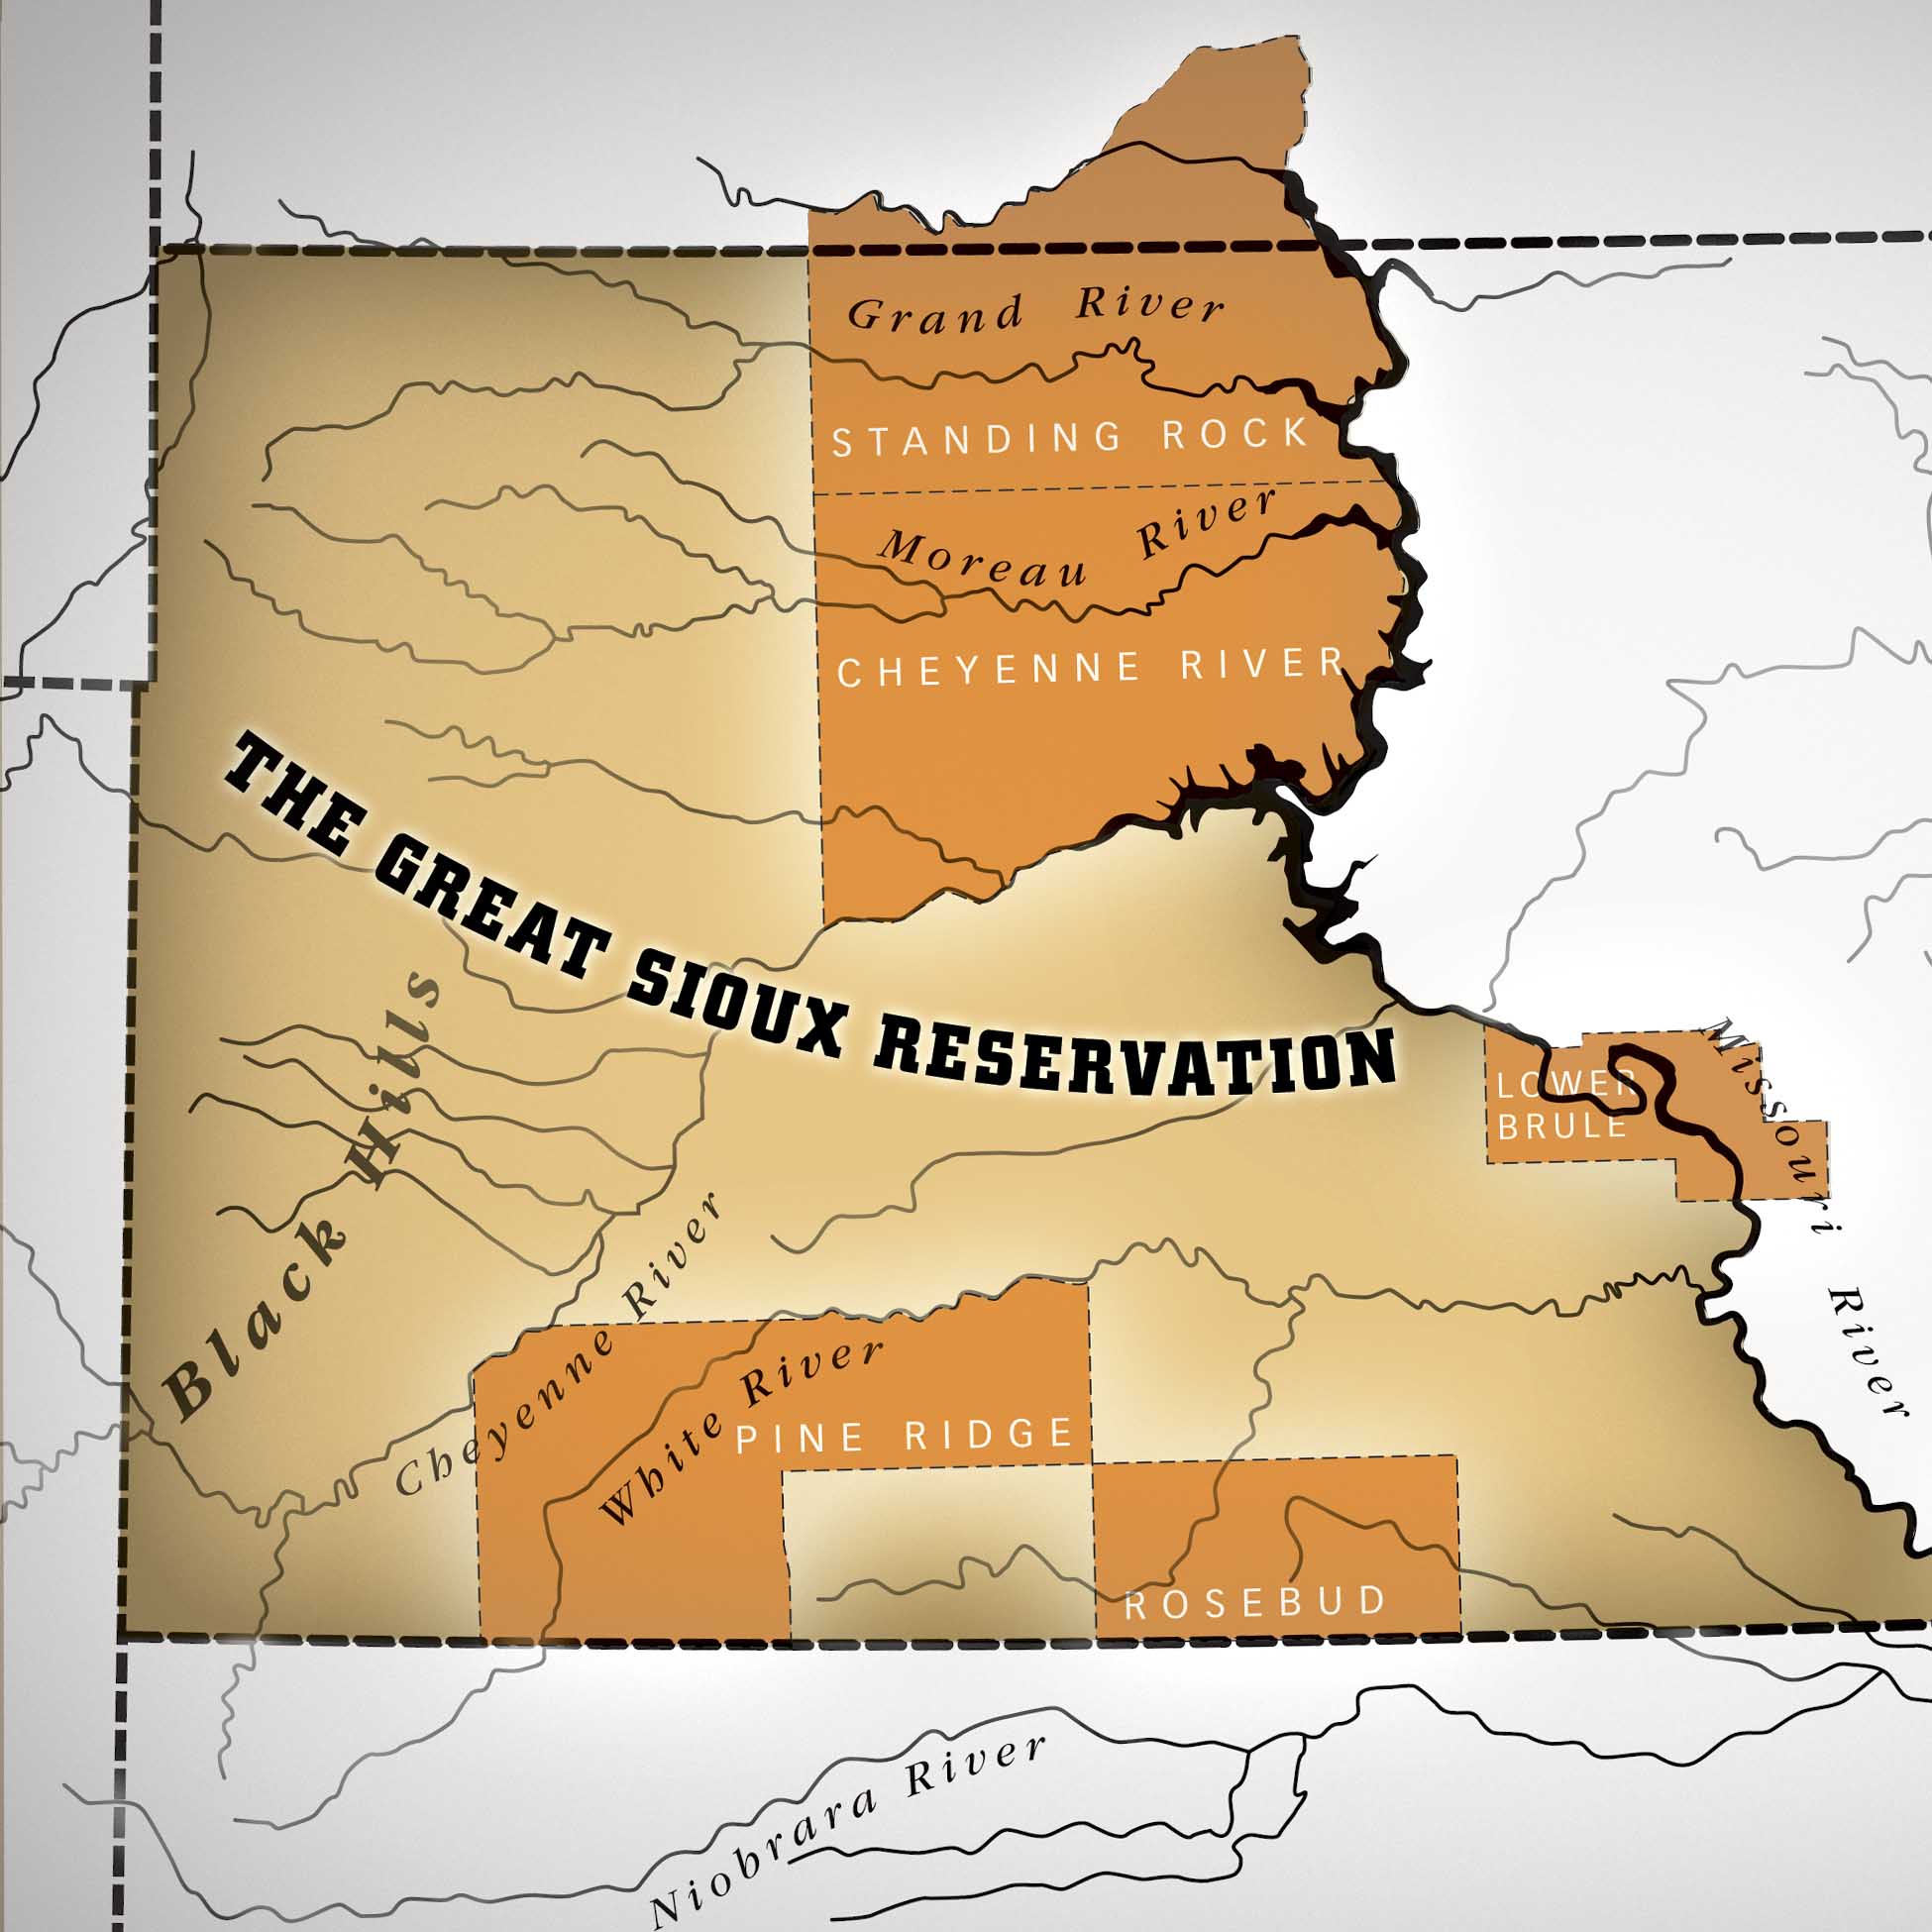 ip Pine Ridge Story Sioux website great sioux reservation map by Design Direction llc clark most